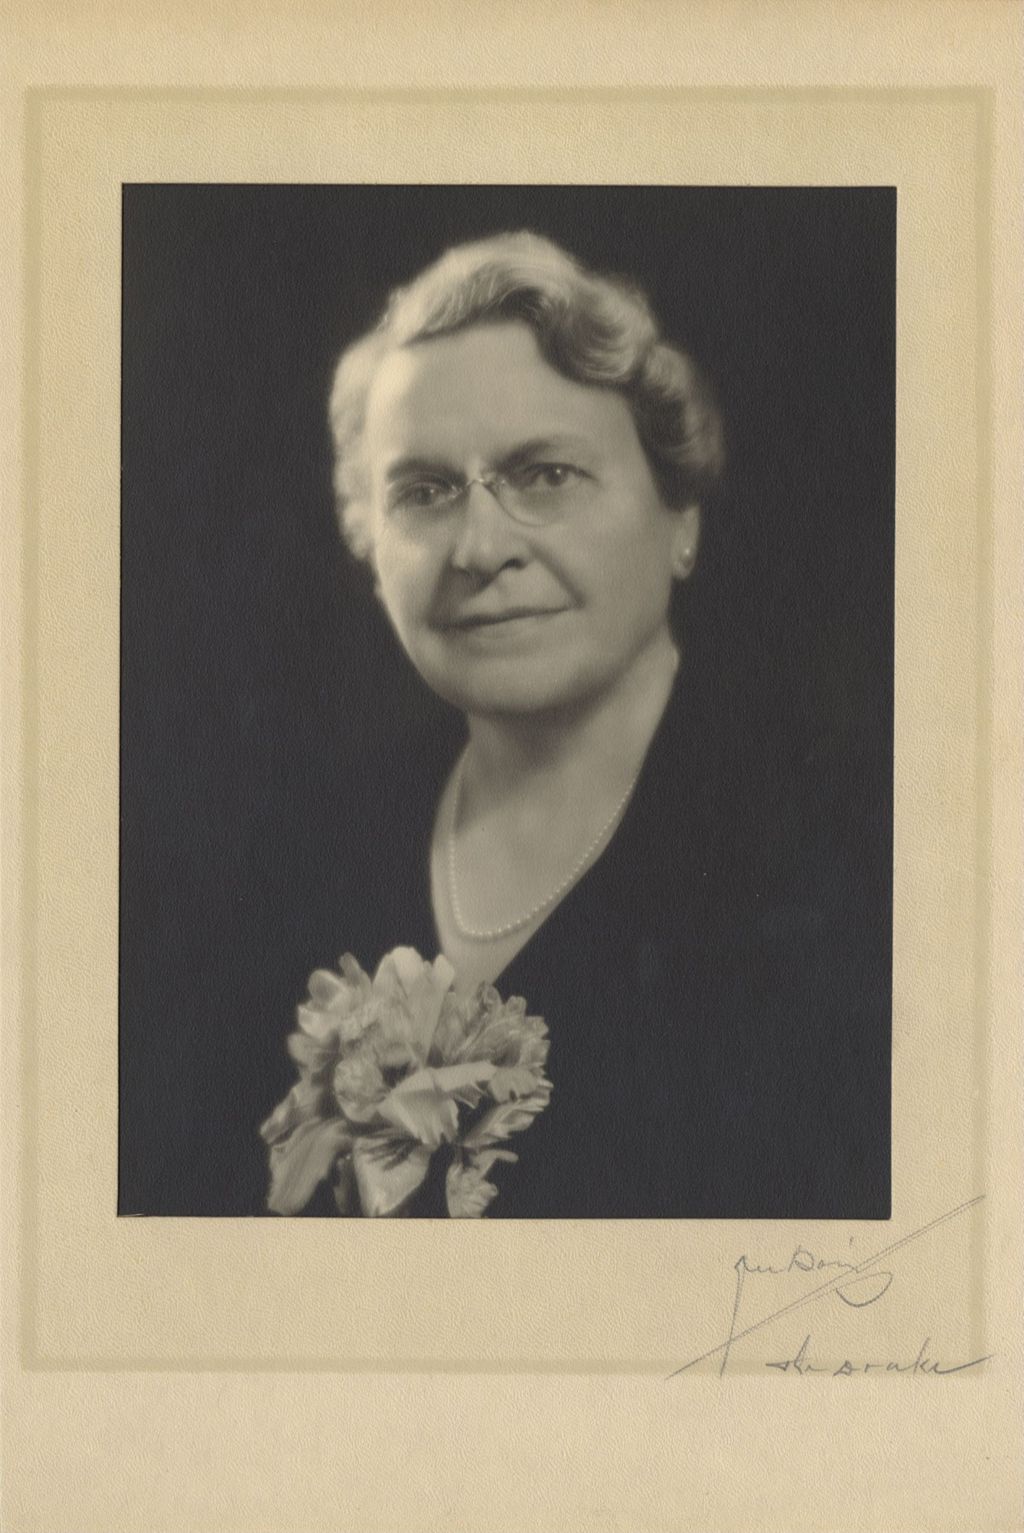 Miniature of Hull-House resident Gertrude H. Britton